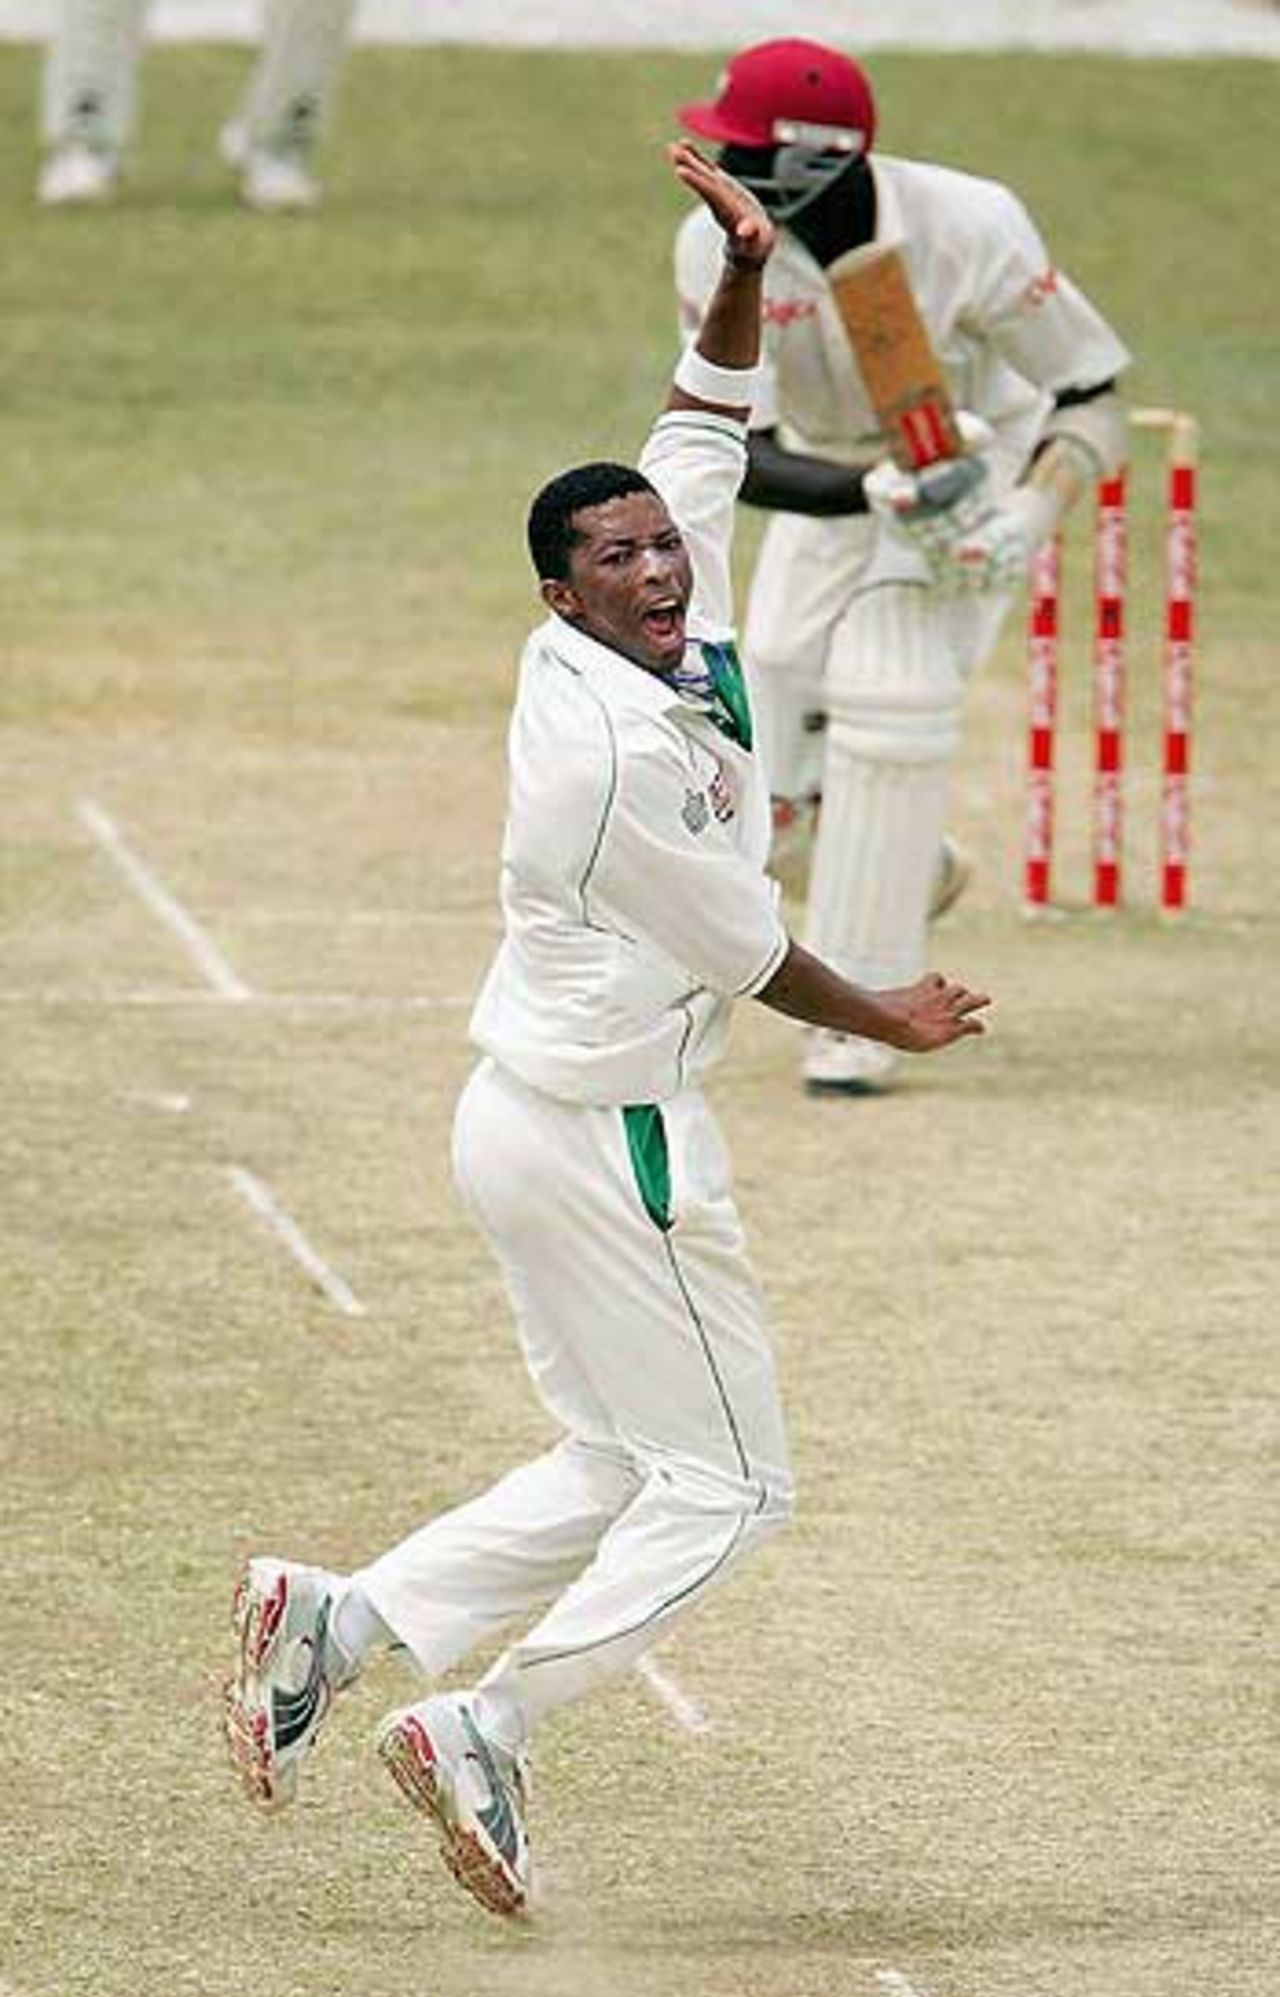 Makhaya Ntini traps Courtney Brown lbw as West Indies collapse during the second Test at Trinidad, West Indies v South Africa, April 8, 2005